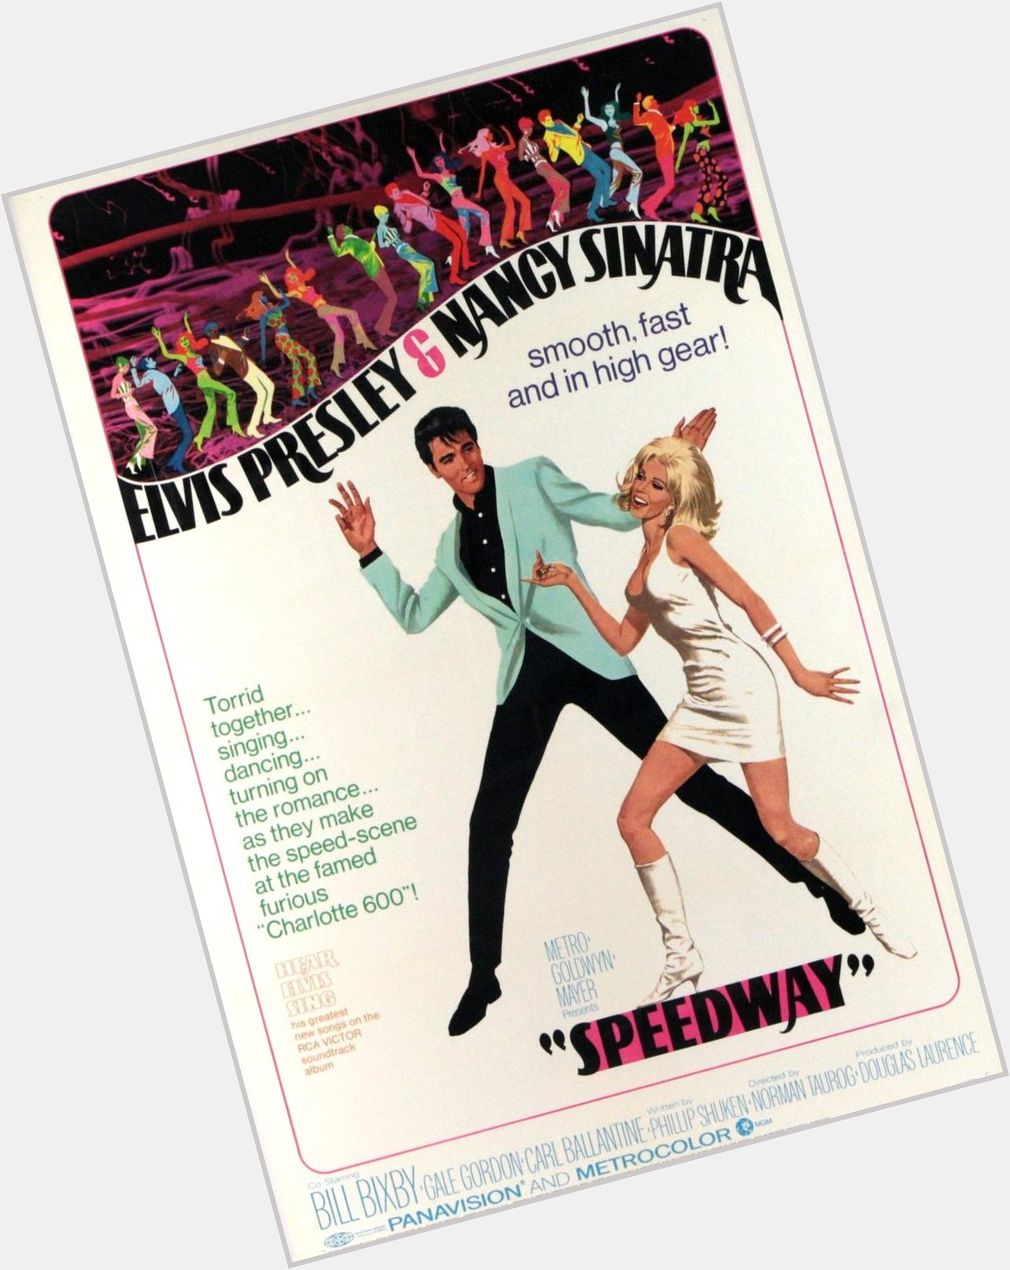 Happy birthday to Nancy Sinatra - Cutting a rug with the King in SPEEDWAY - 1968 